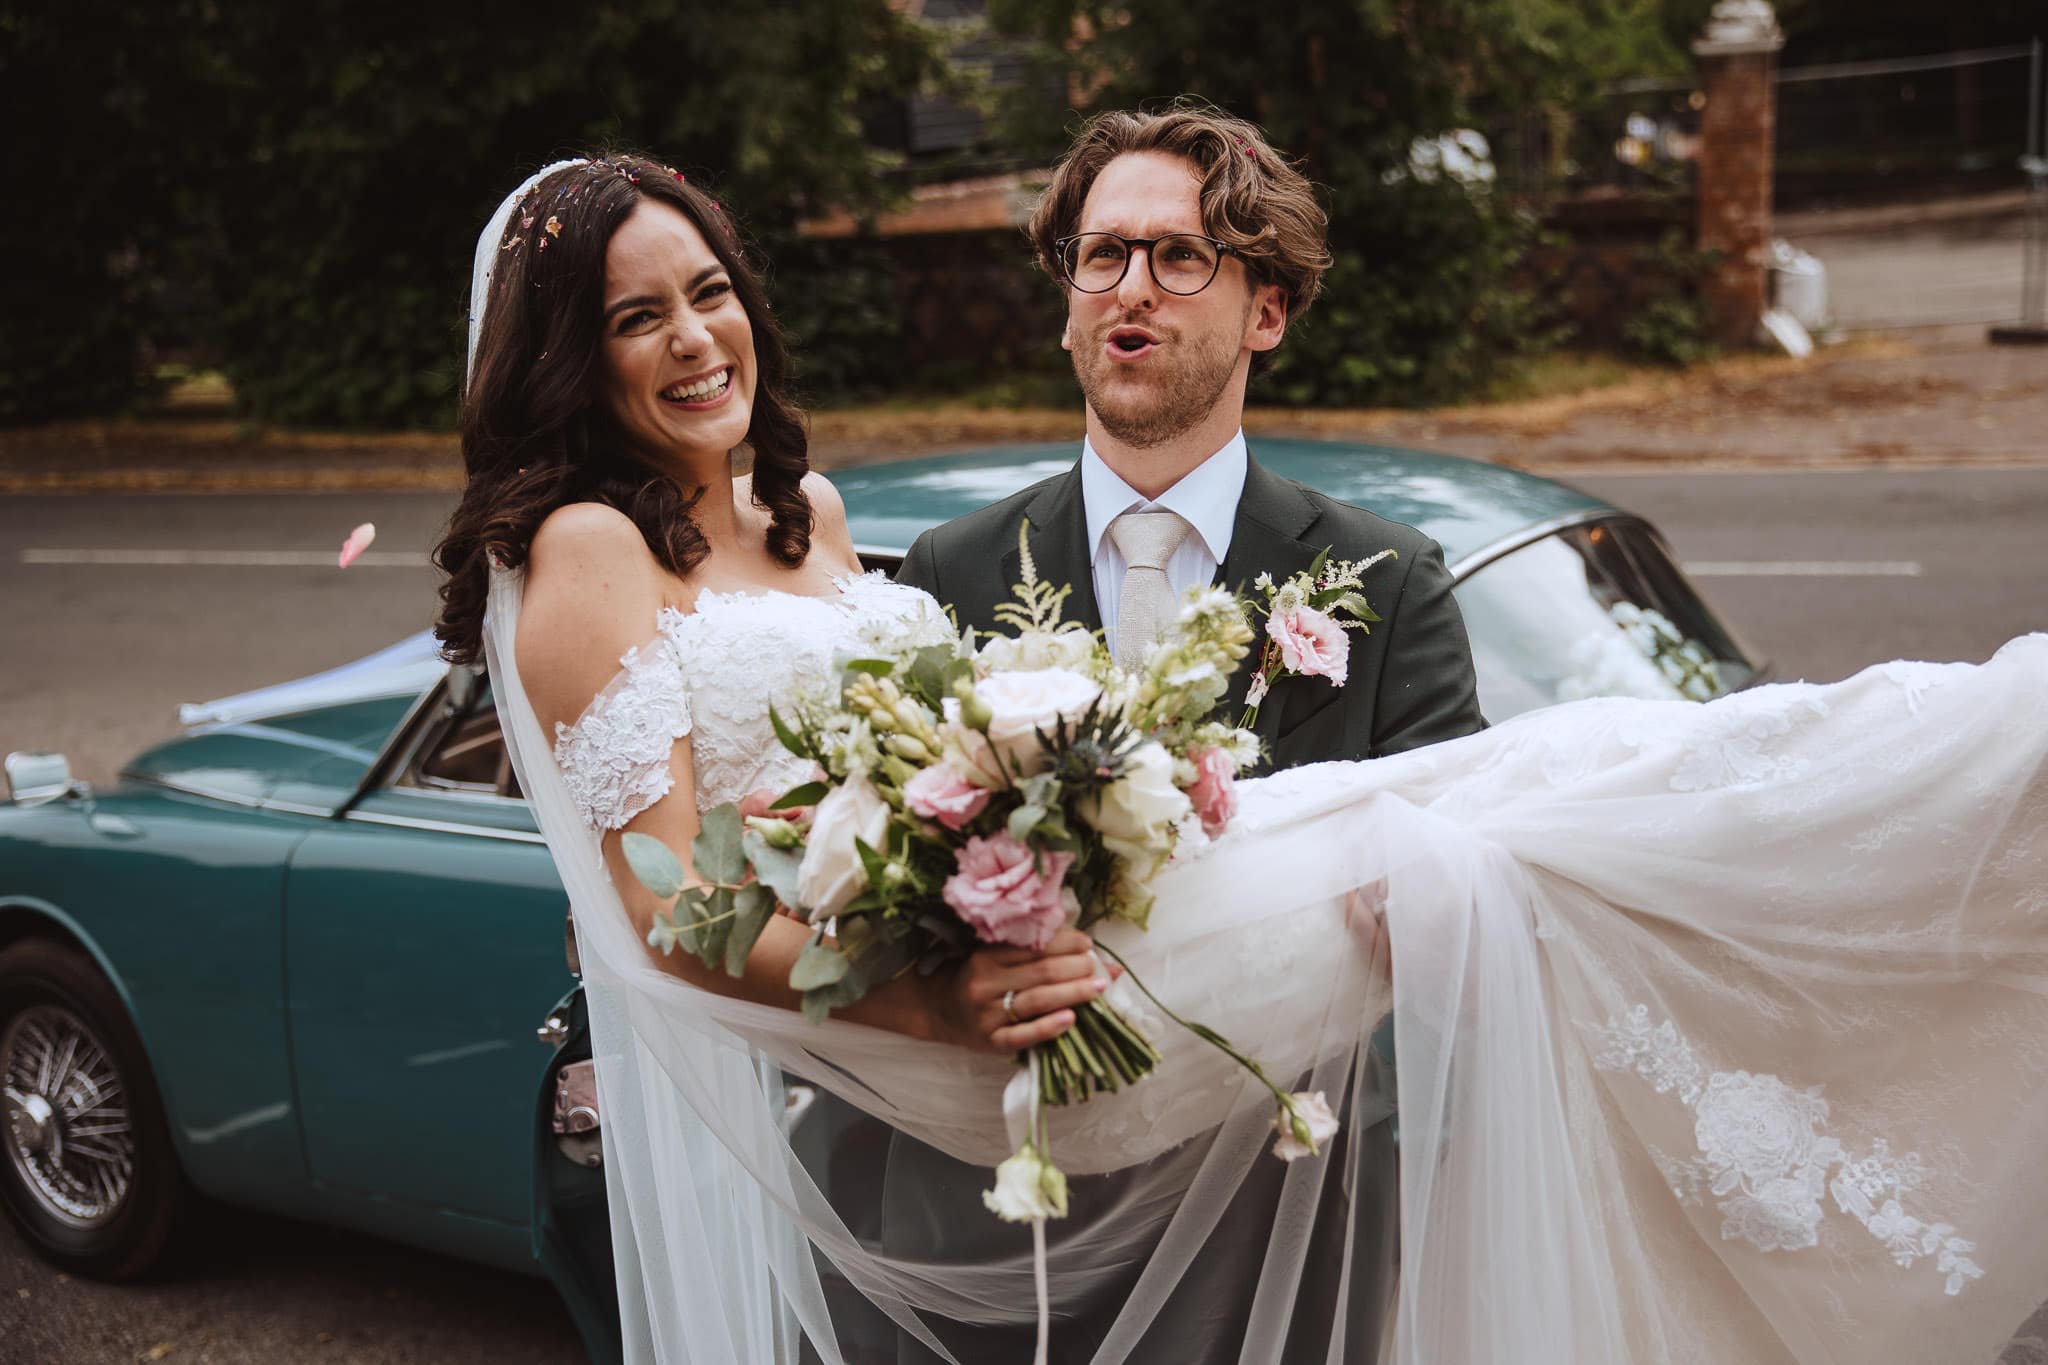 groom carrying his bride to their vintage wedding car